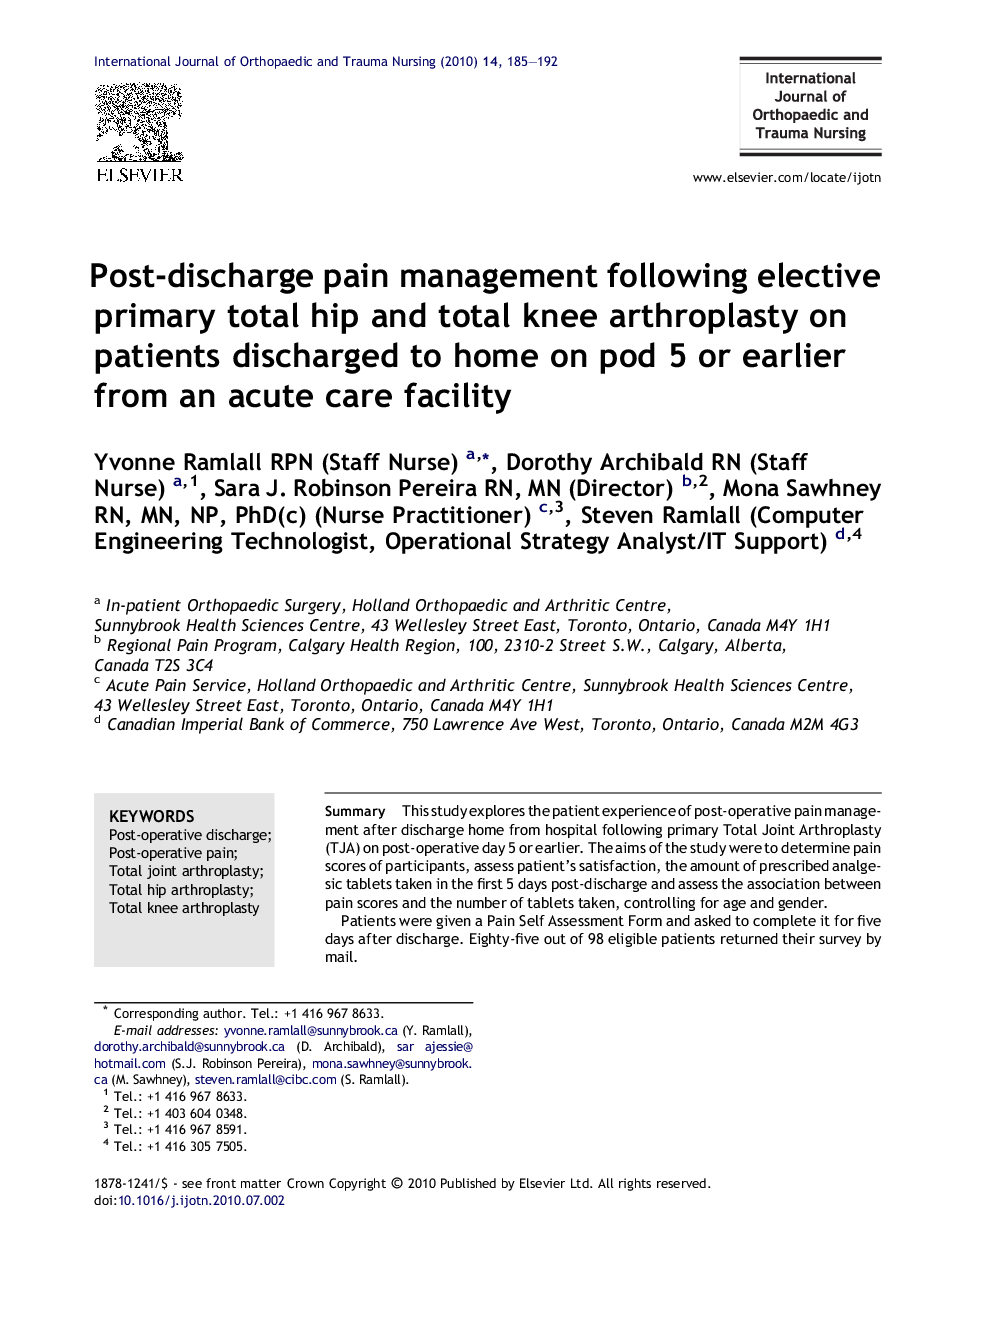 Post-discharge pain management following elective primary total hip and total knee arthroplasty on patients discharged to home on pod 5 or earlier from an acute care facility